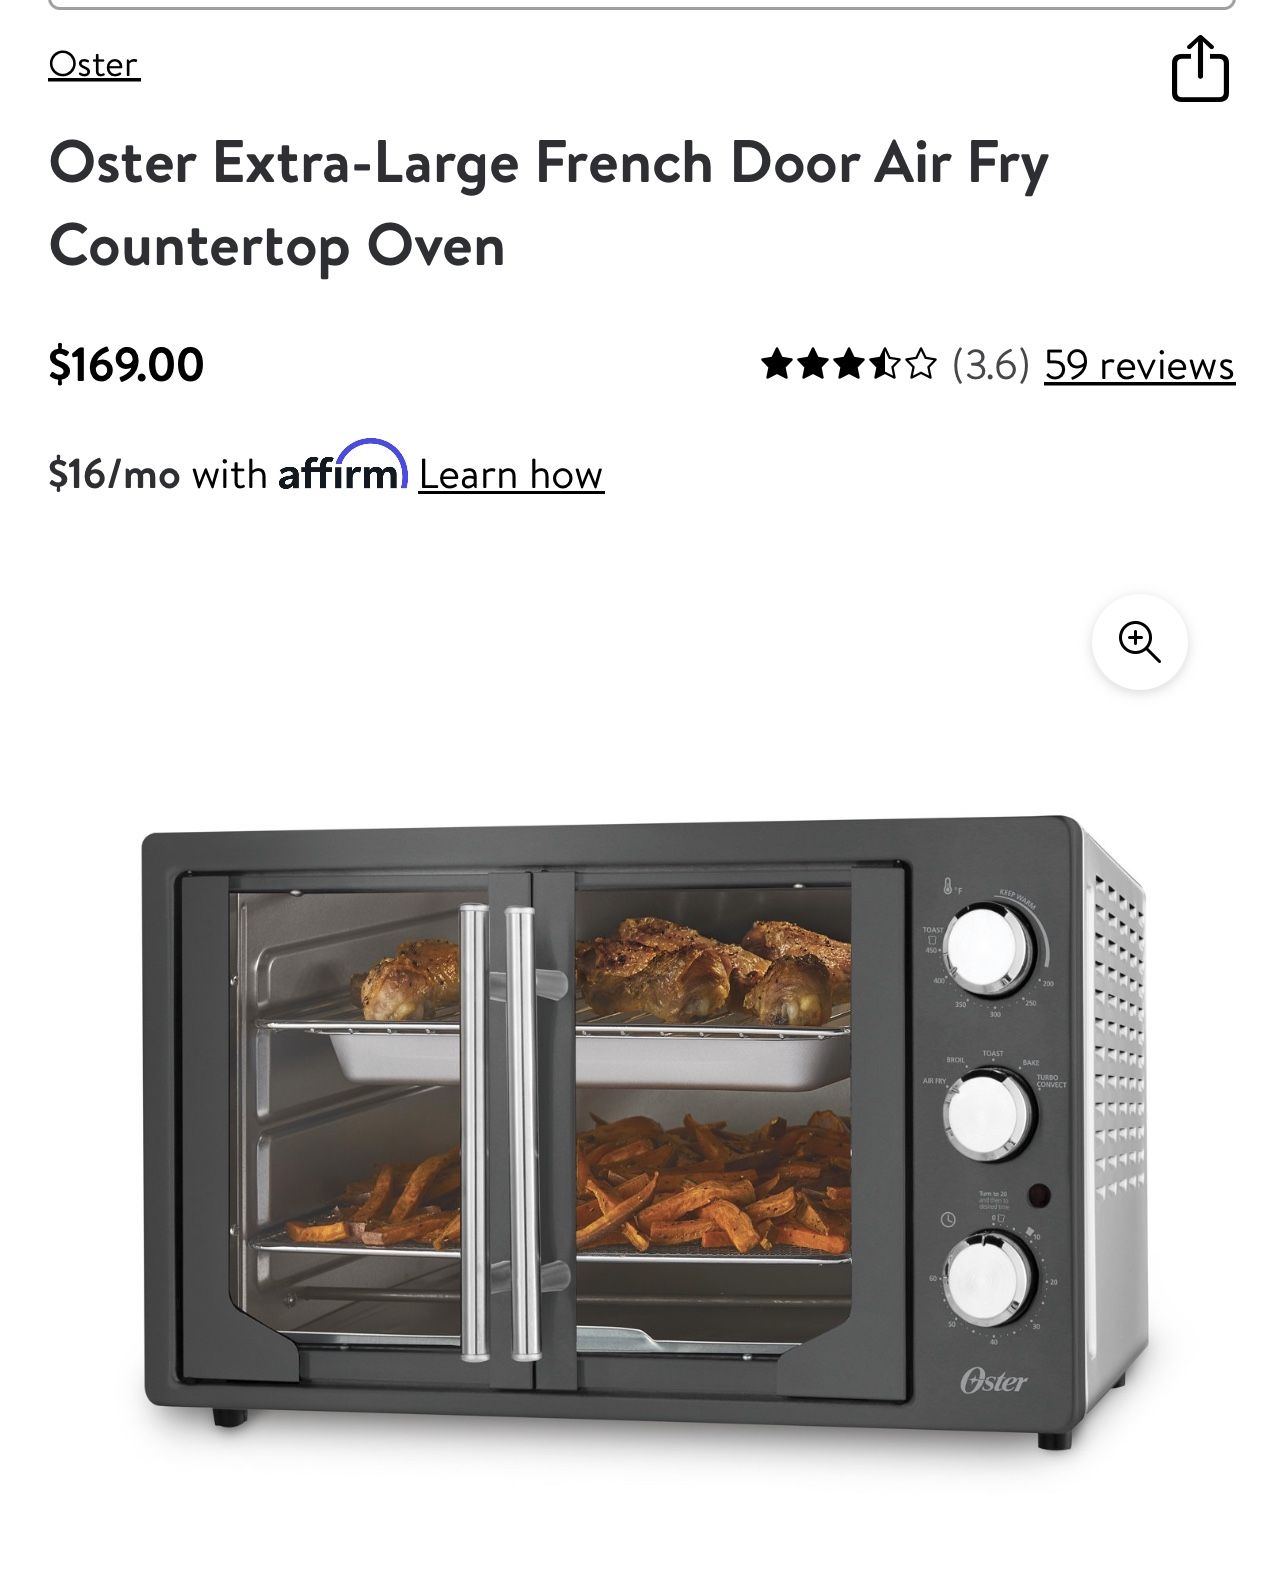 Oster Extra-Large French Door Air Fry Countertop Oven for Sale in